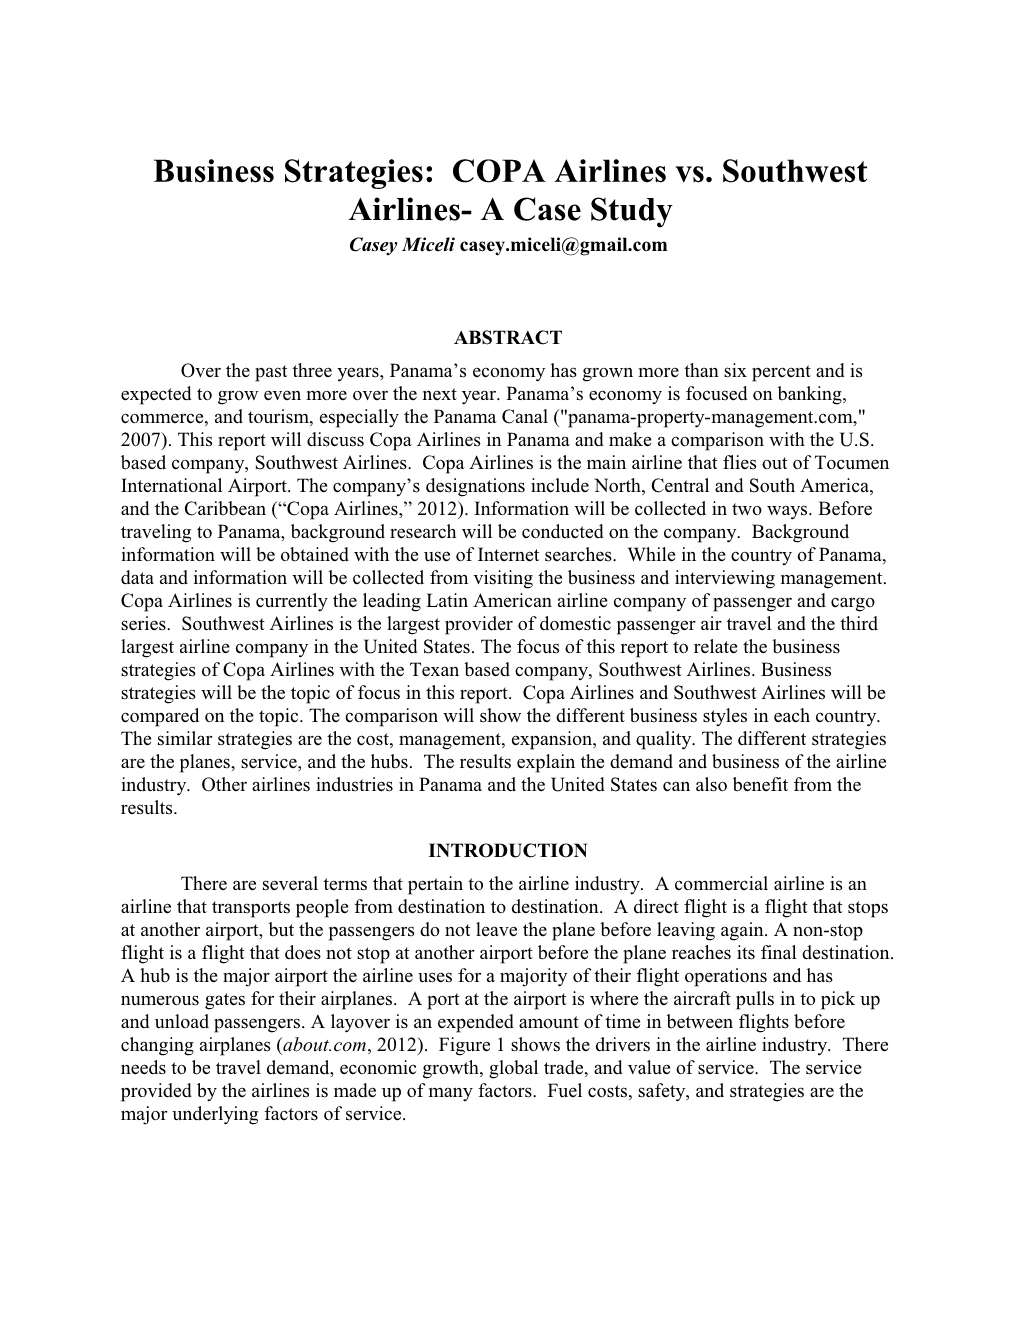 Business Strategies: COPA Airlines Vs